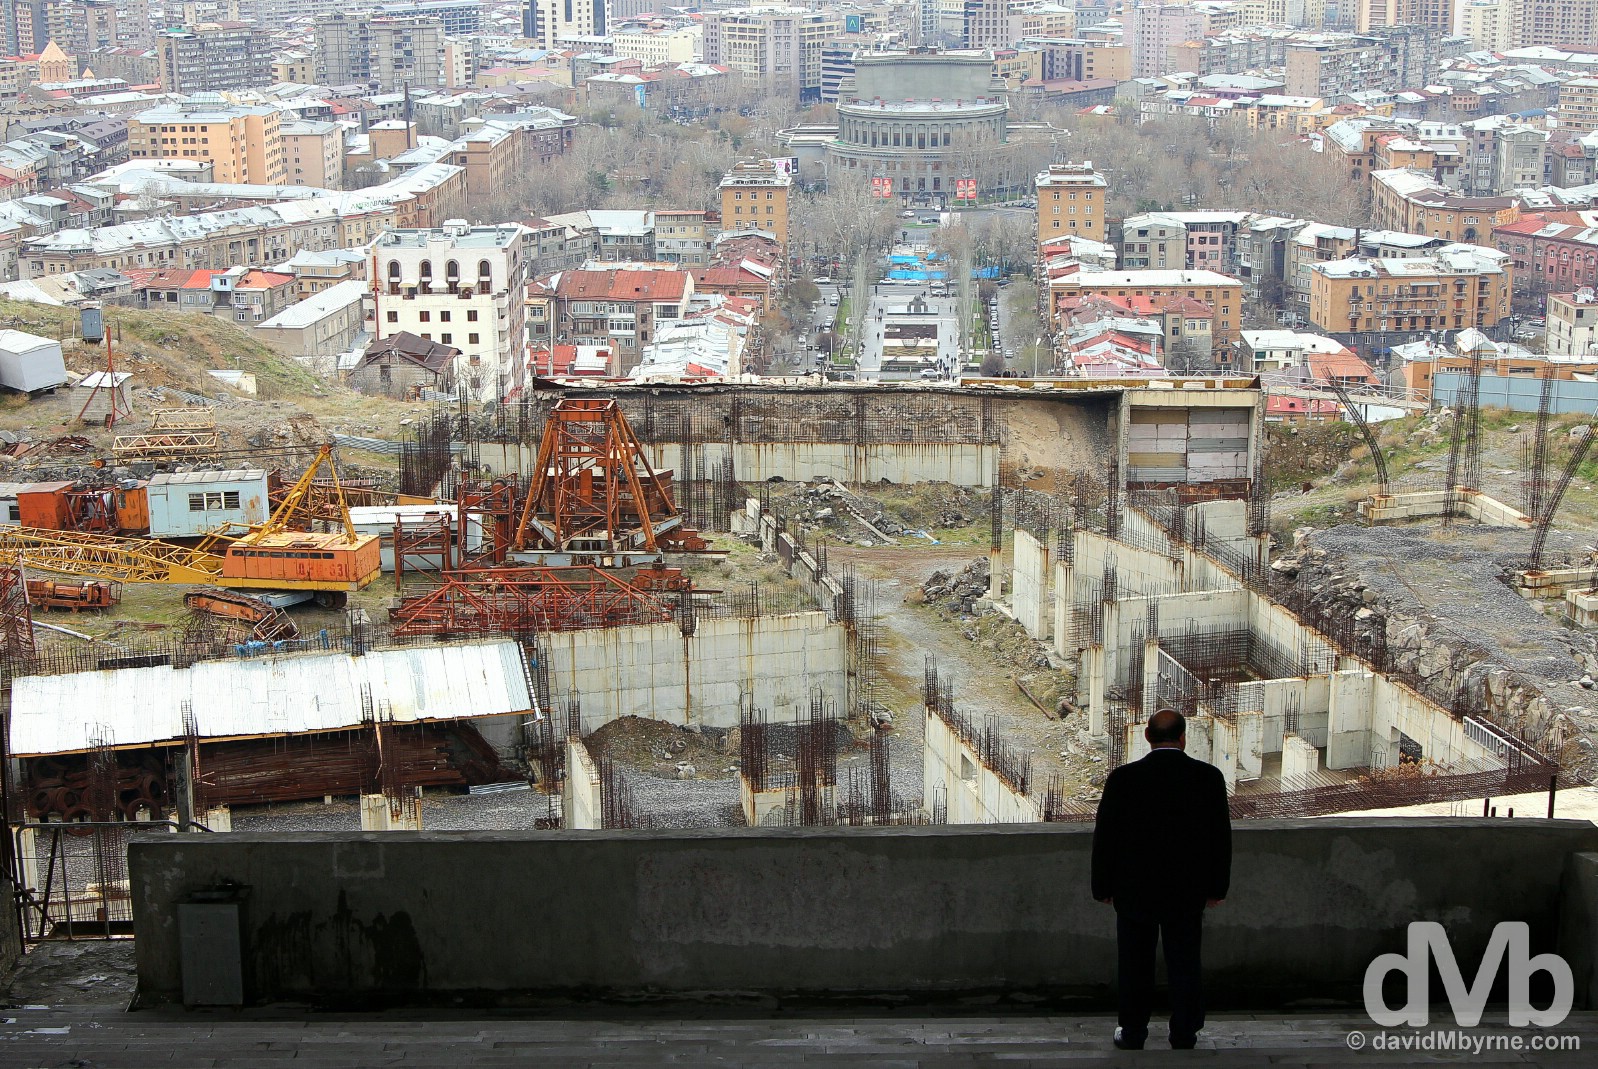 The view of Yerevan, Armenia, as seen from the city's 50th Anniversary of Soviet Armenia Monument. March 24, 2015.